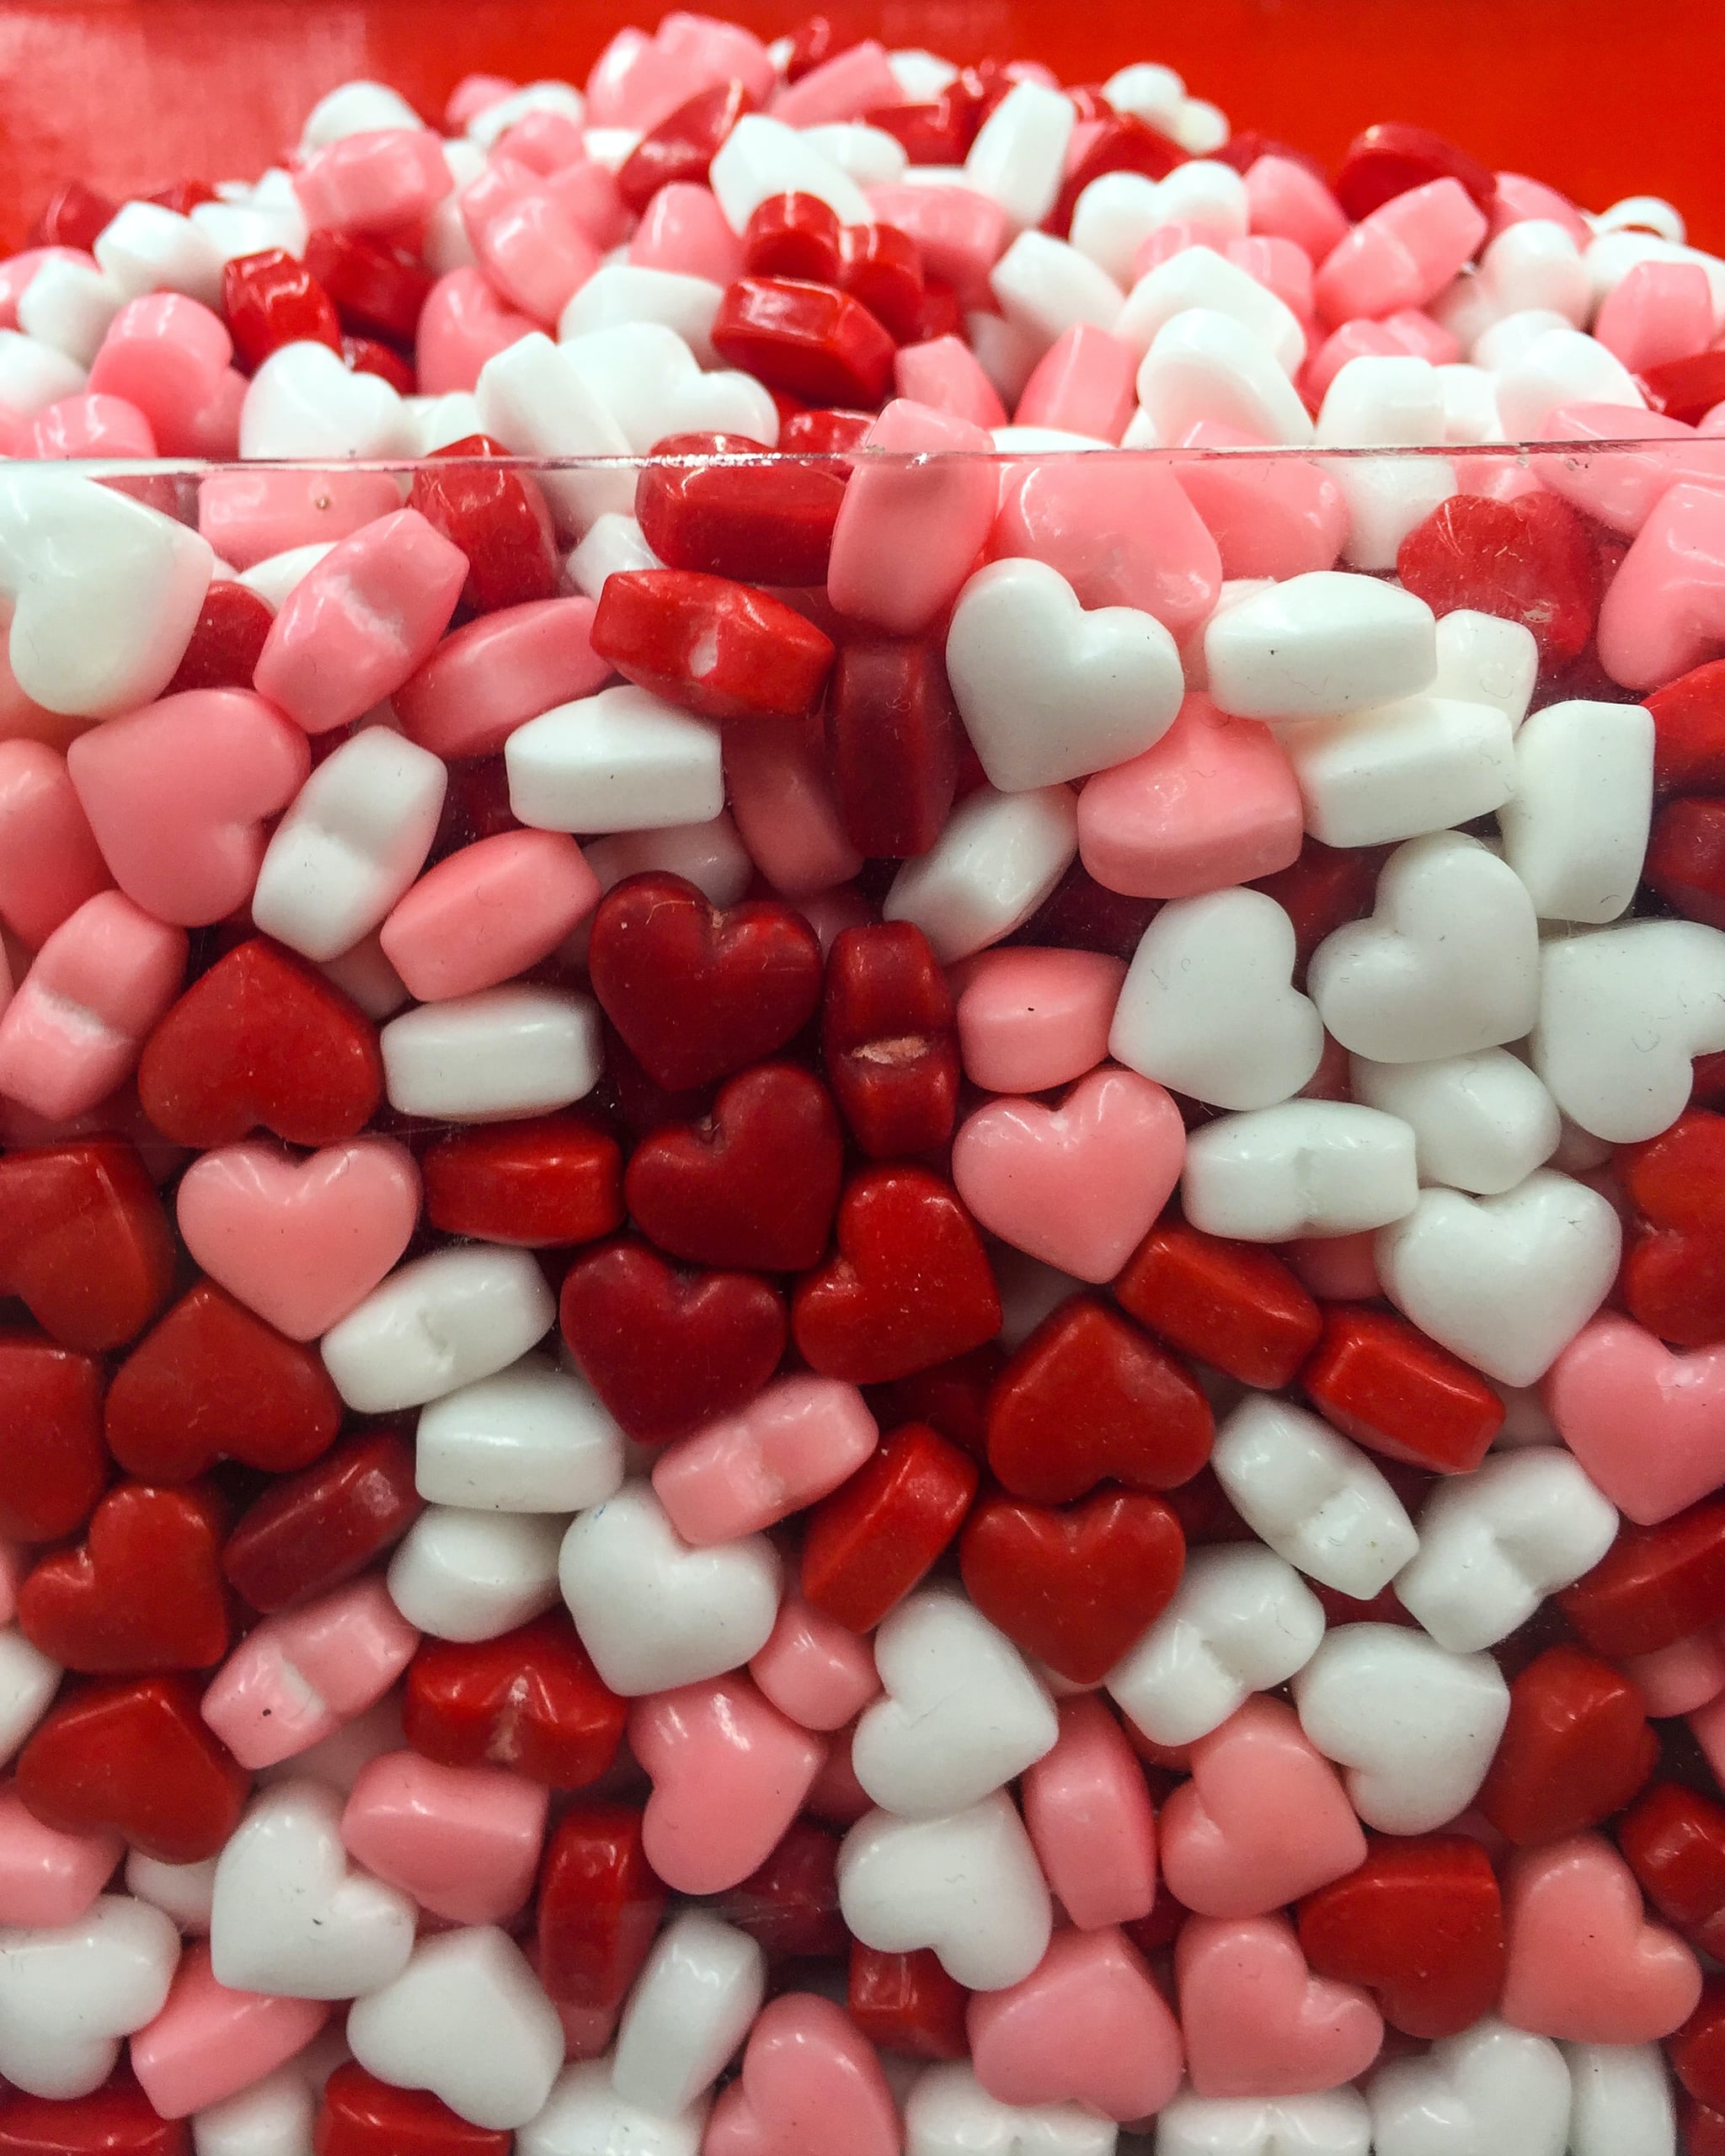 Heart Candy iPhone Wallpaper. The Most Romantic, Sweet, and Downright Dreamy iPhone Wallpaper For Valentine's Day